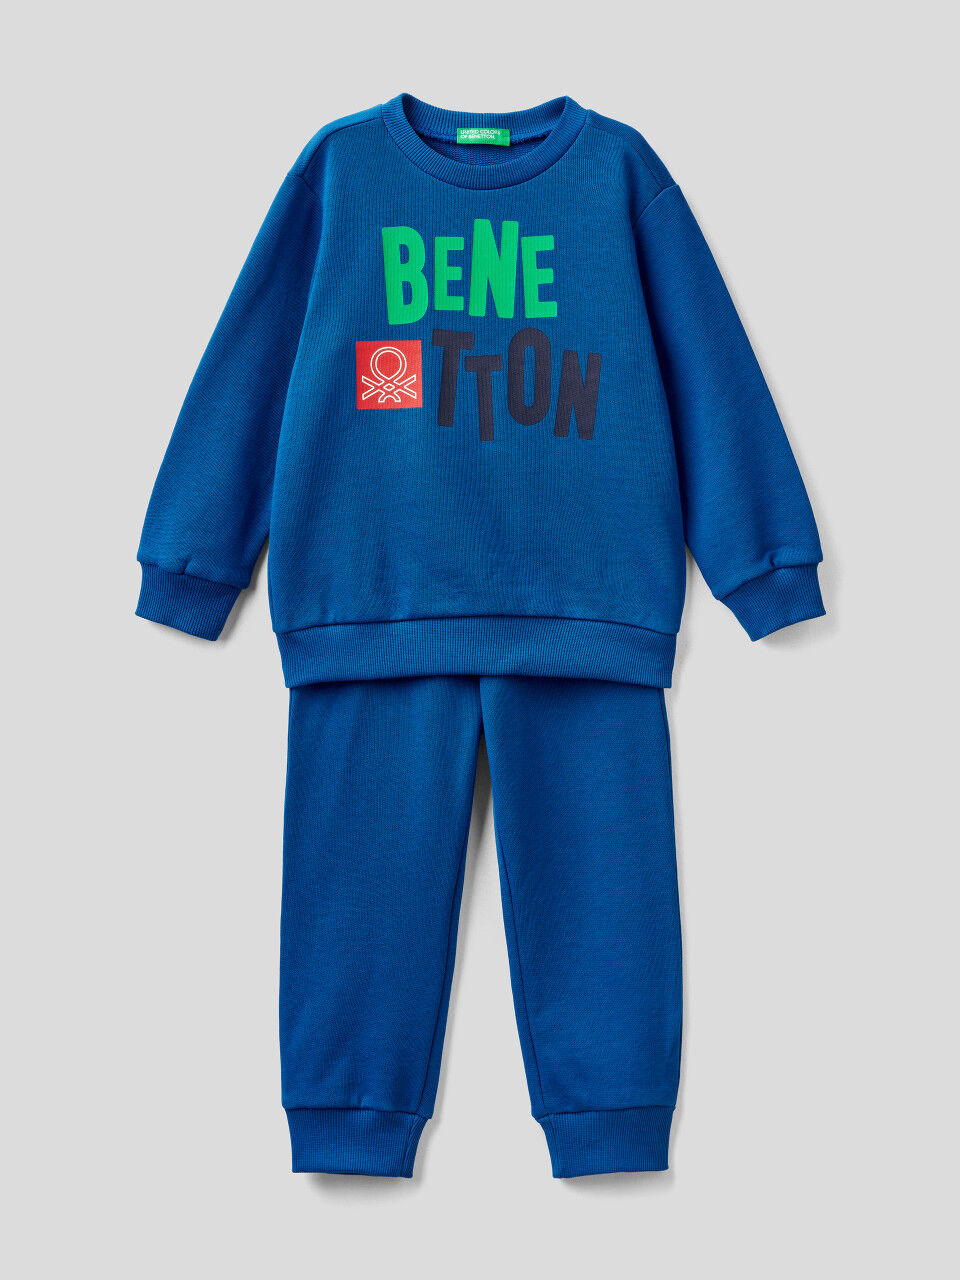 Very Comfortable for Outside Tracksuit for  Boys Handmade Clothing Unisex Kids Clothing Clothing Sets School Organic Material for Kids *PORTFOLIO* 